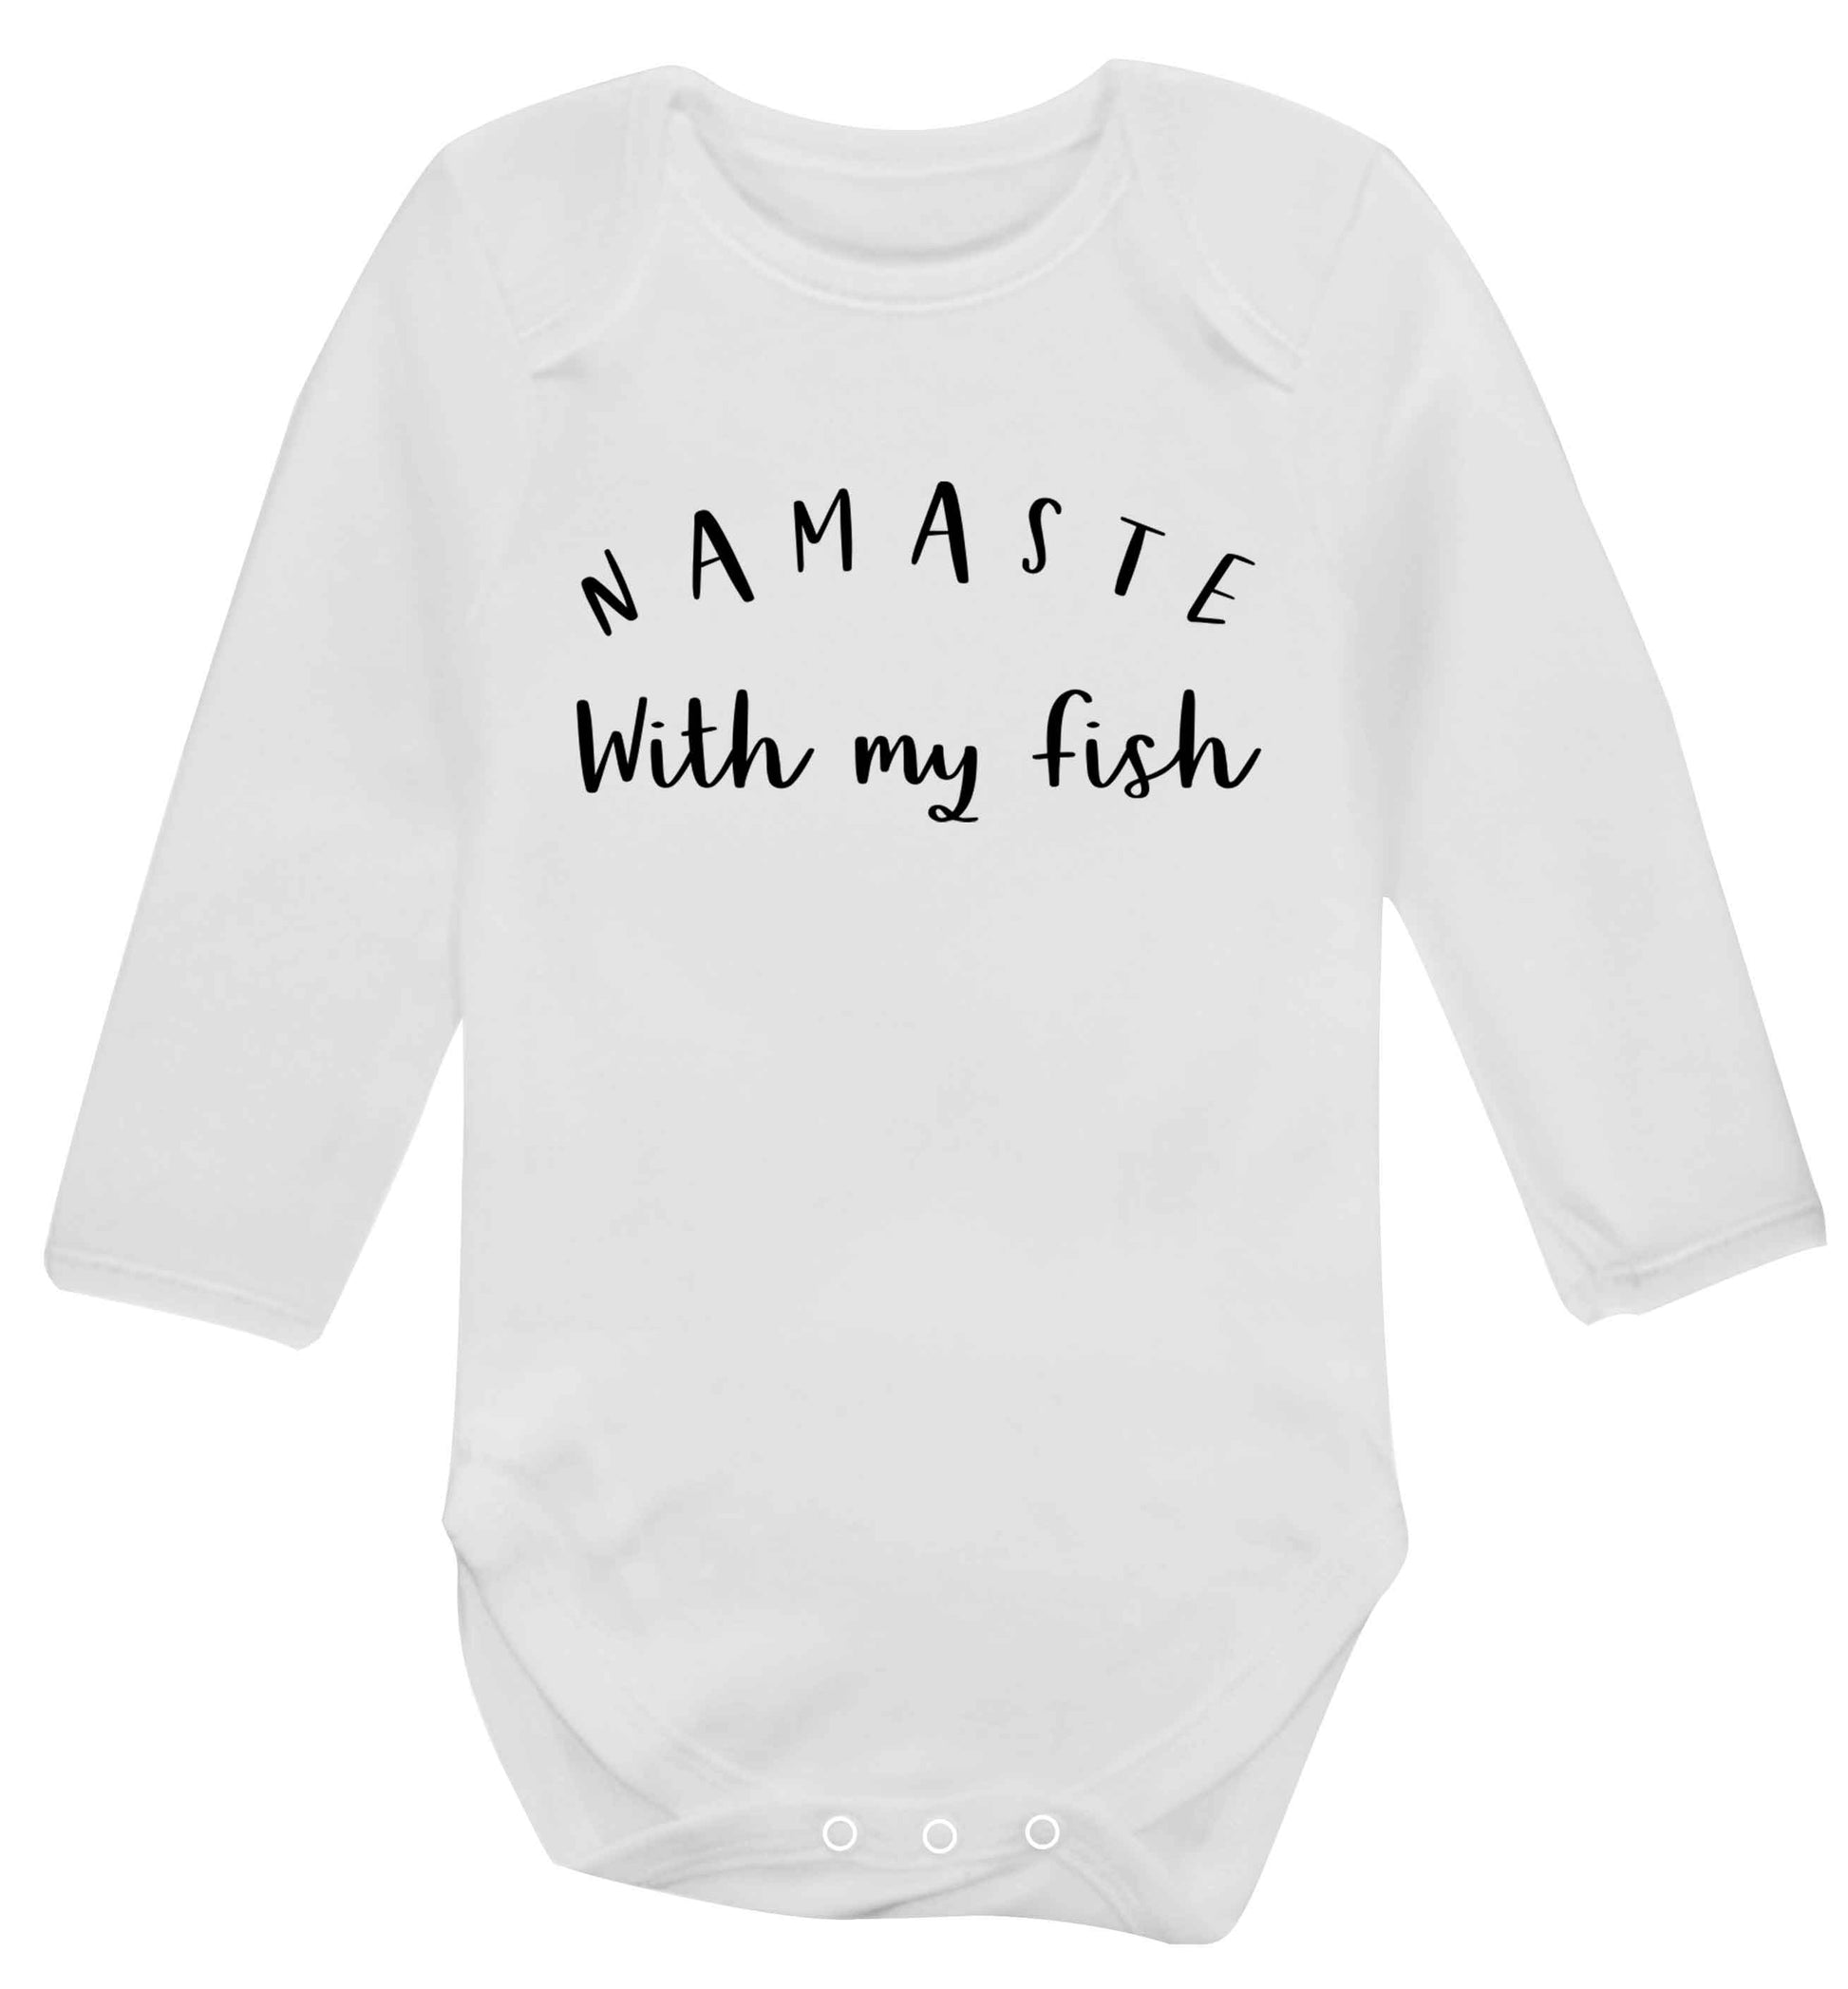 Namaste with my fish Baby Vest long sleeved white 6-12 months